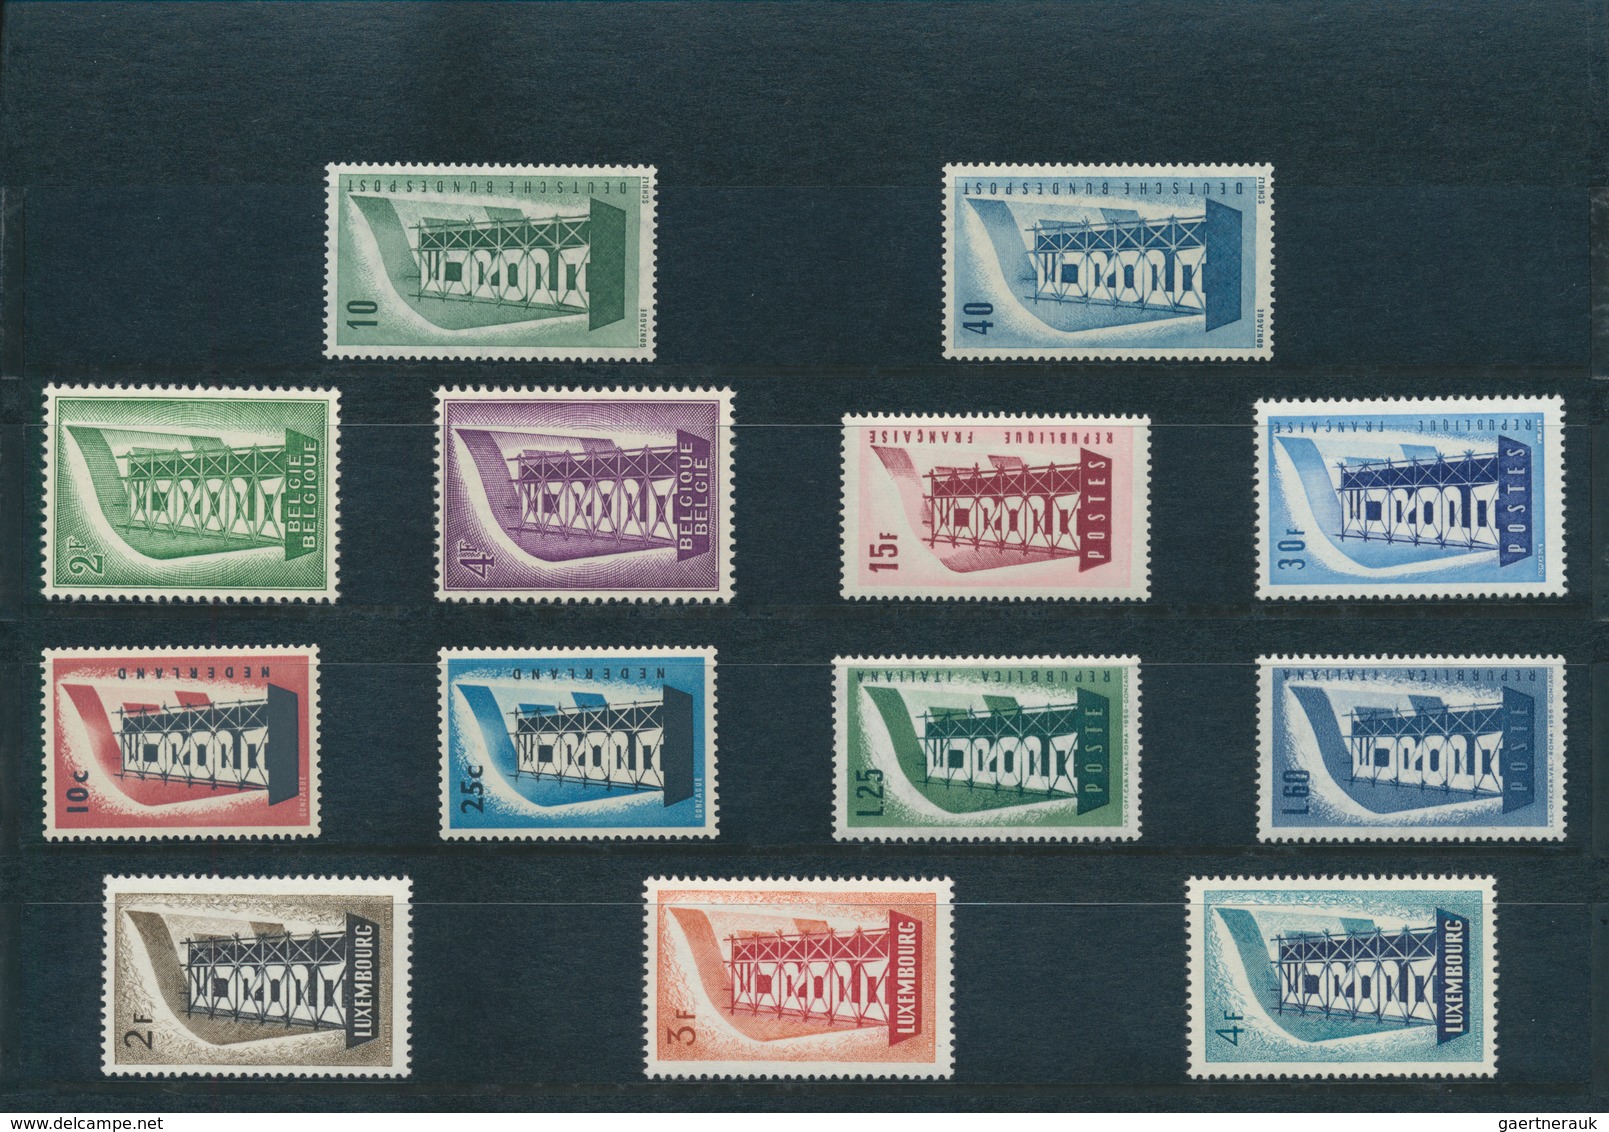 Europa-Union (CEPT): Mint Never Hinged Collection Of The Joint Issues; Complete In The Main Numbers; - Europe (Other)